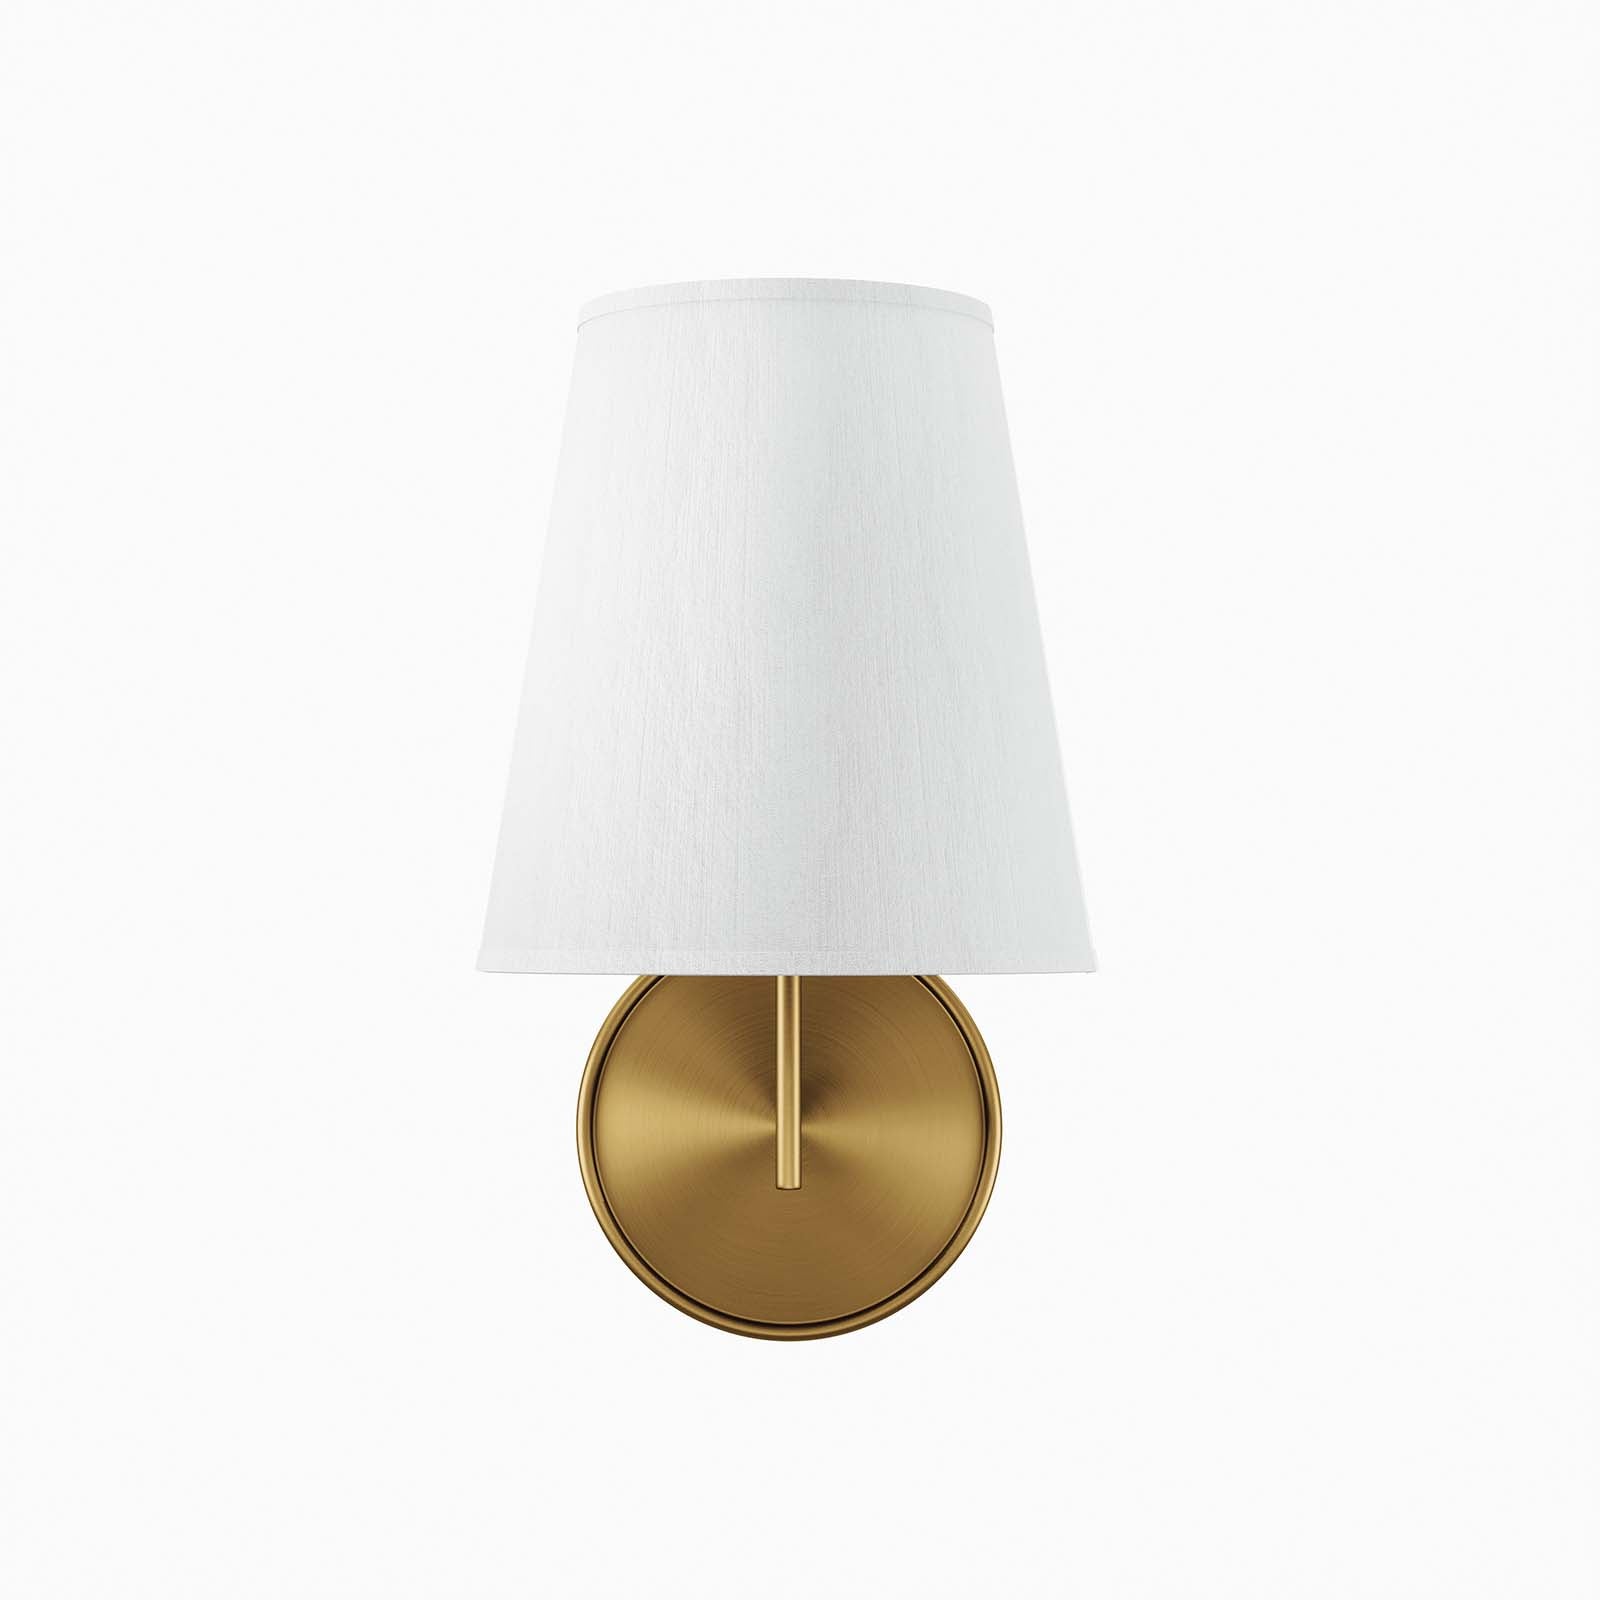 Surround Wall Sconce - East Shore Modern Home Furnishings